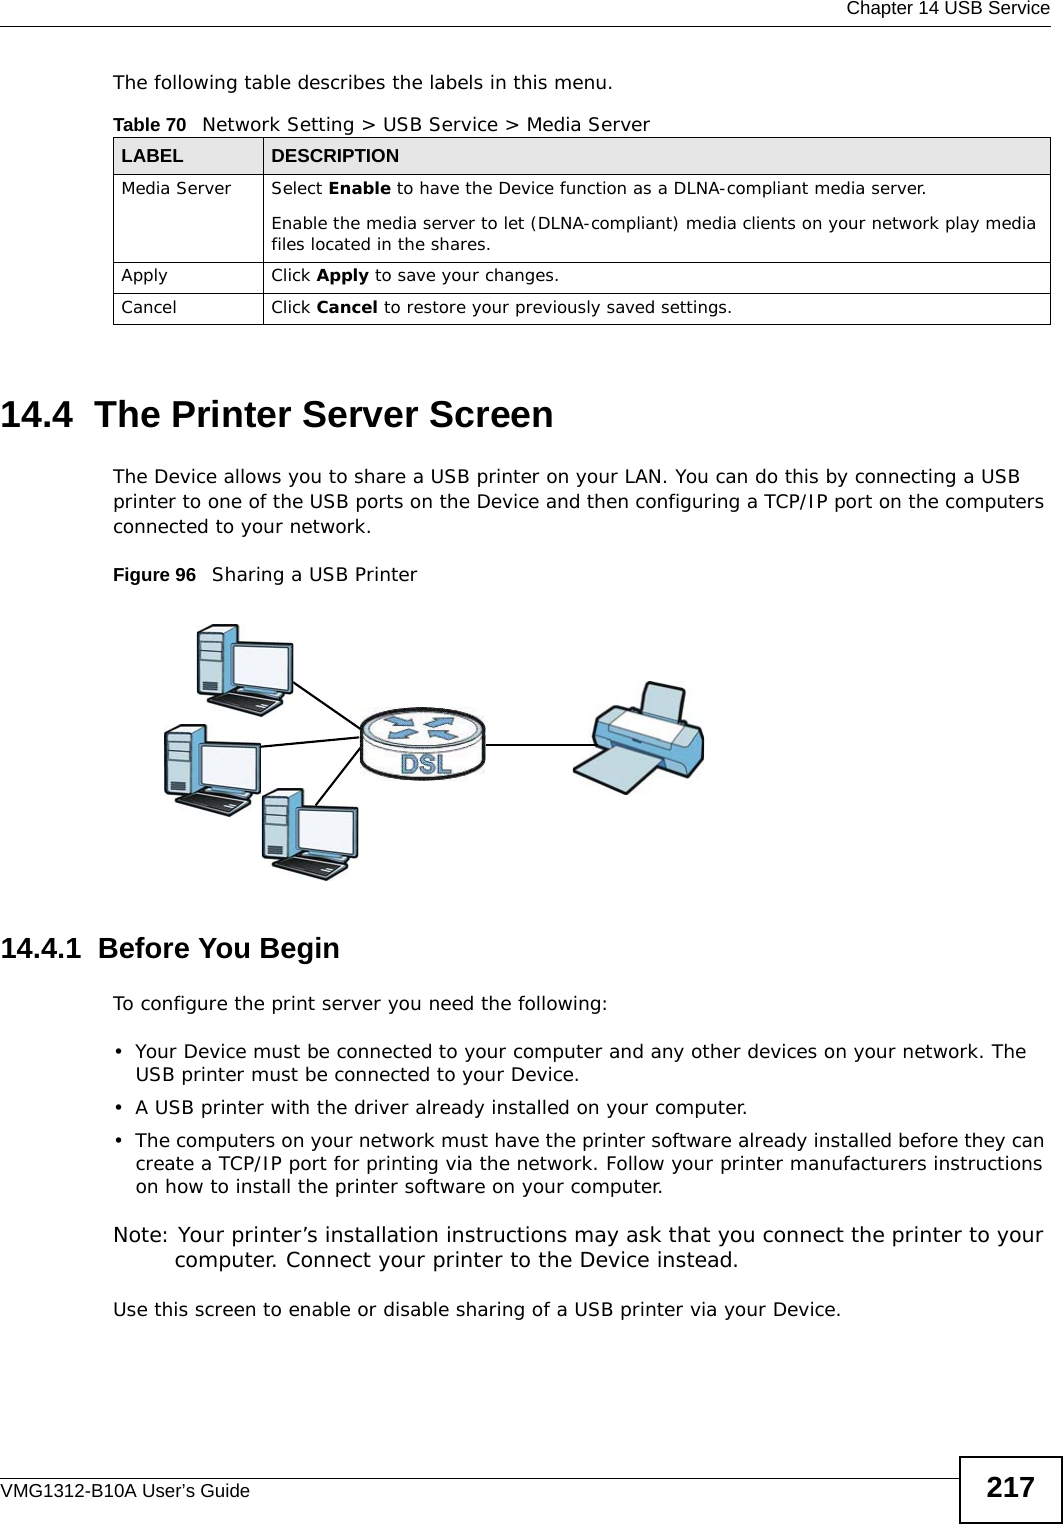  Chapter 14 USB ServiceVMG1312-B10A User’s Guide 217The following table describes the labels in this menu.14.4  The Printer Server ScreenThe Device allows you to share a USB printer on your LAN. You can do this by connecting a USB printer to one of the USB ports on the Device and then configuring a TCP/IP port on the computers connected to your network. Figure 96   Sharing a USB Printer14.4.1  Before You BeginTo configure the print server you need the following:• Your Device must be connected to your computer and any other devices on your network. The USB printer must be connected to your Device.• A USB printer with the driver already installed on your computer.• The computers on your network must have the printer software already installed before they can create a TCP/IP port for printing via the network. Follow your printer manufacturers instructions on how to install the printer software on your computer. Note: Your printer’s installation instructions may ask that you connect the printer to your computer. Connect your printer to the Device instead.Use this screen to enable or disable sharing of a USB printer via your Device. Table 70   Network Setting &gt; USB Service &gt; Media ServerLABEL DESCRIPTIONMedia Server Select Enable to have the Device function as a DLNA-compliant media server.Enable the media server to let (DLNA-compliant) media clients on your network play media files located in the shares. Apply Click Apply to save your changes.Cancel Click Cancel to restore your previously saved settings.